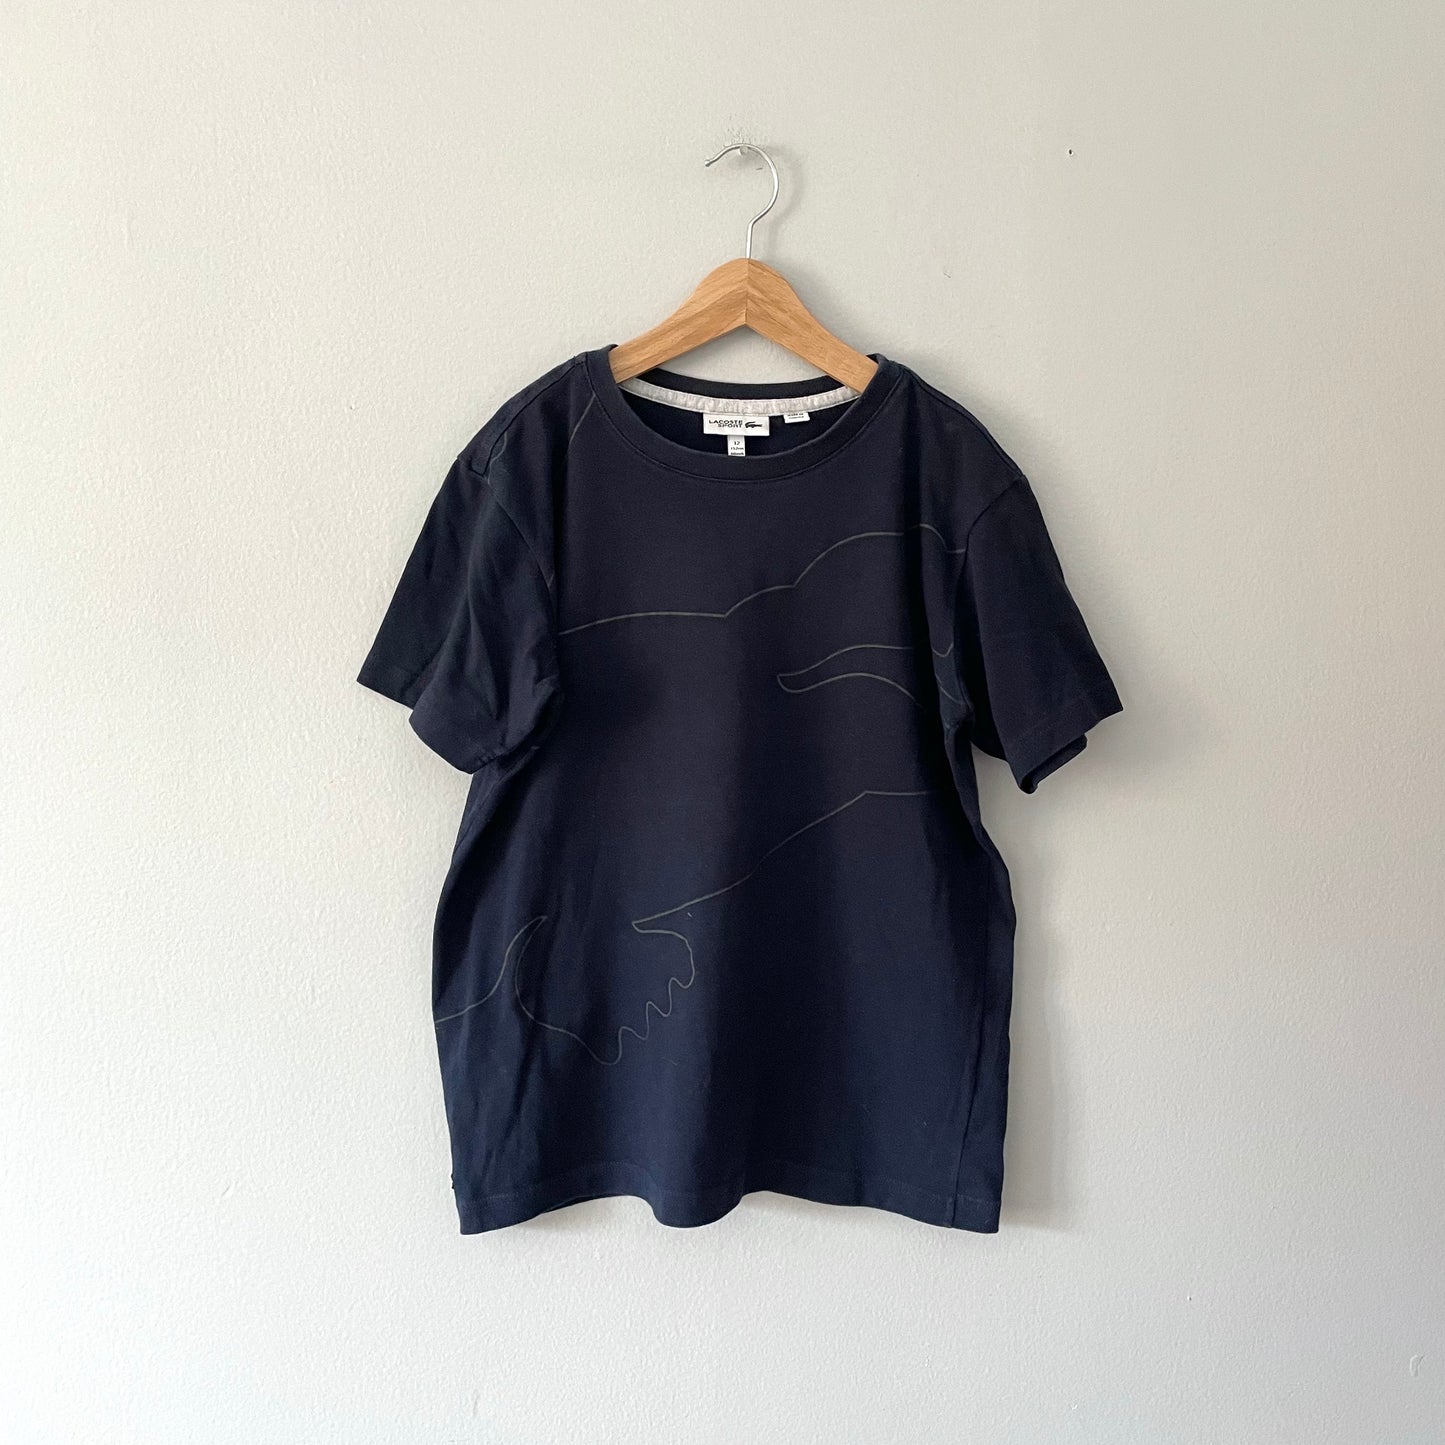 Lacoste / Navy T-shirt / 12Y